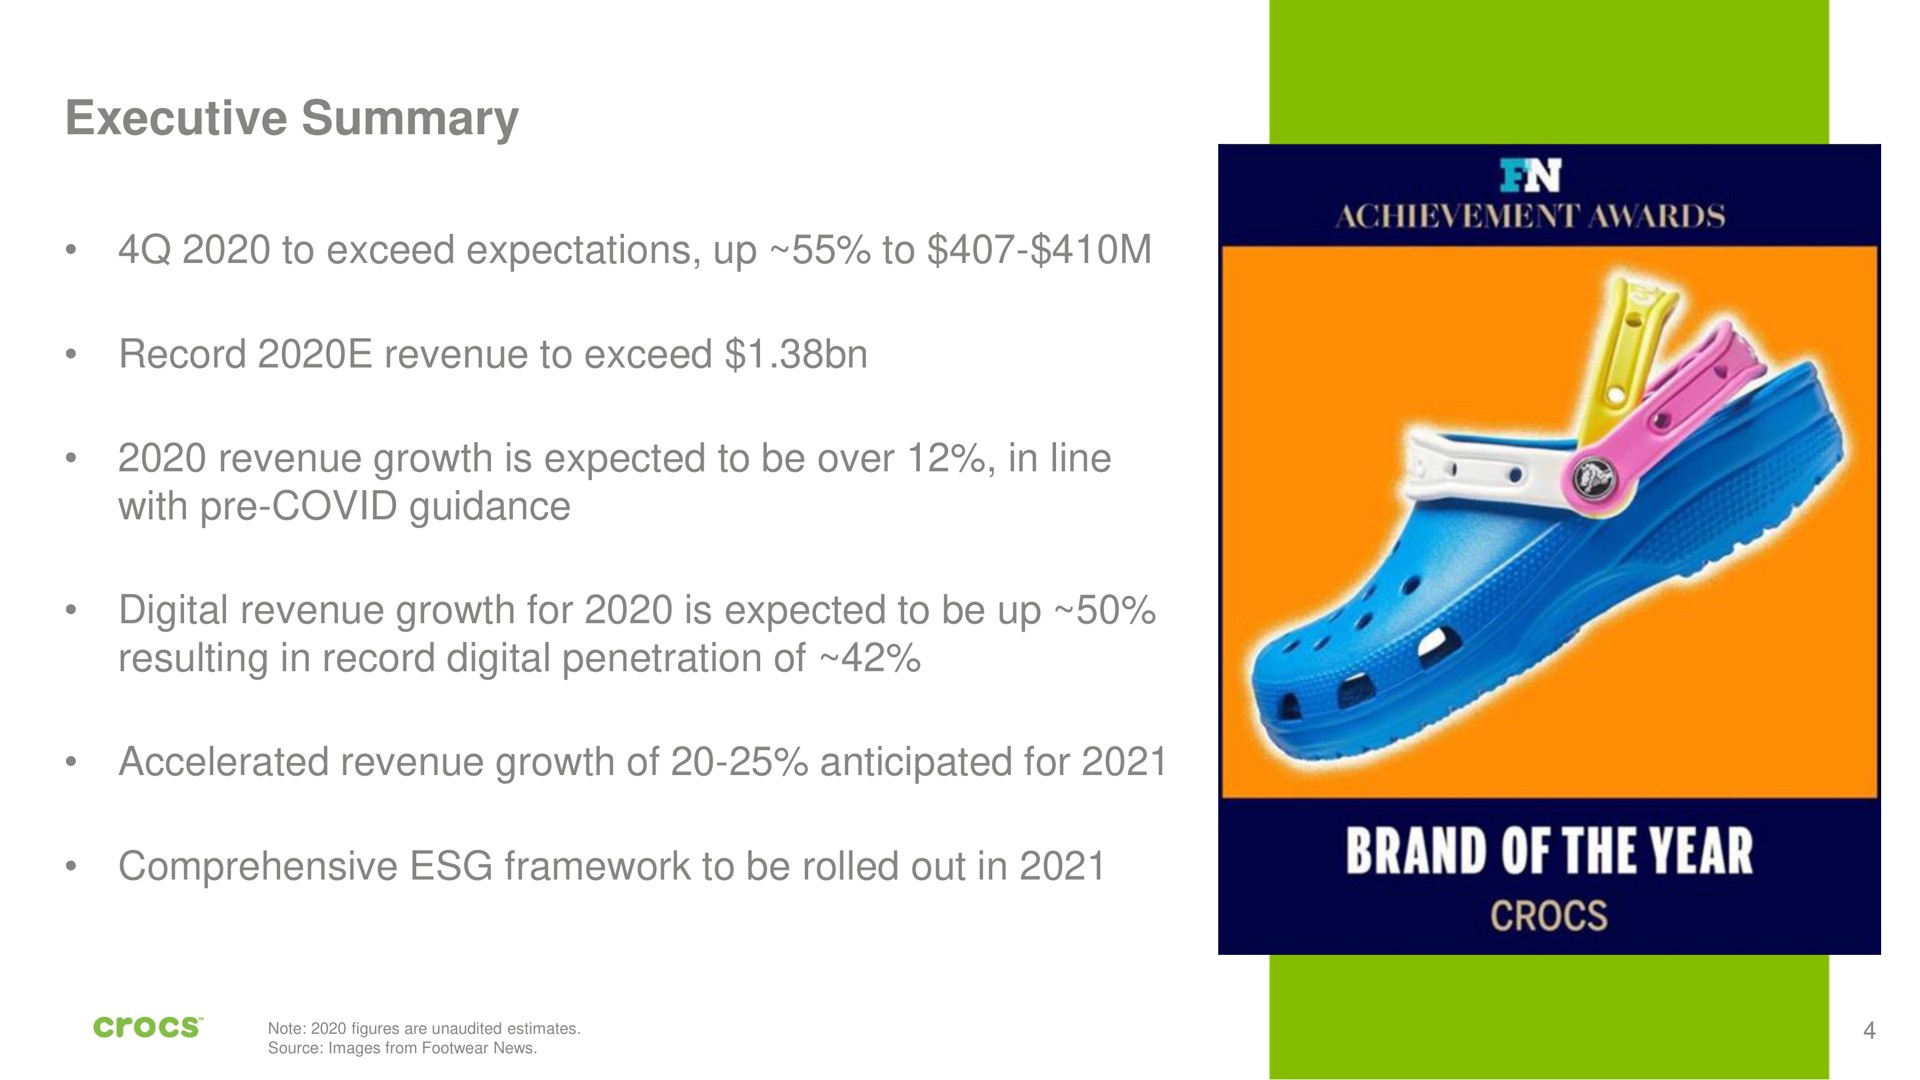 executive summary to exceed expectations up to record revenue to exceed revenue growth is expected to be over in line with covid guidance digital revenue growth for is expected to be up resulting in record digital penetration of accelerated revenue growth of anticipated for comprehensive framework to be rolled out in | Crocs